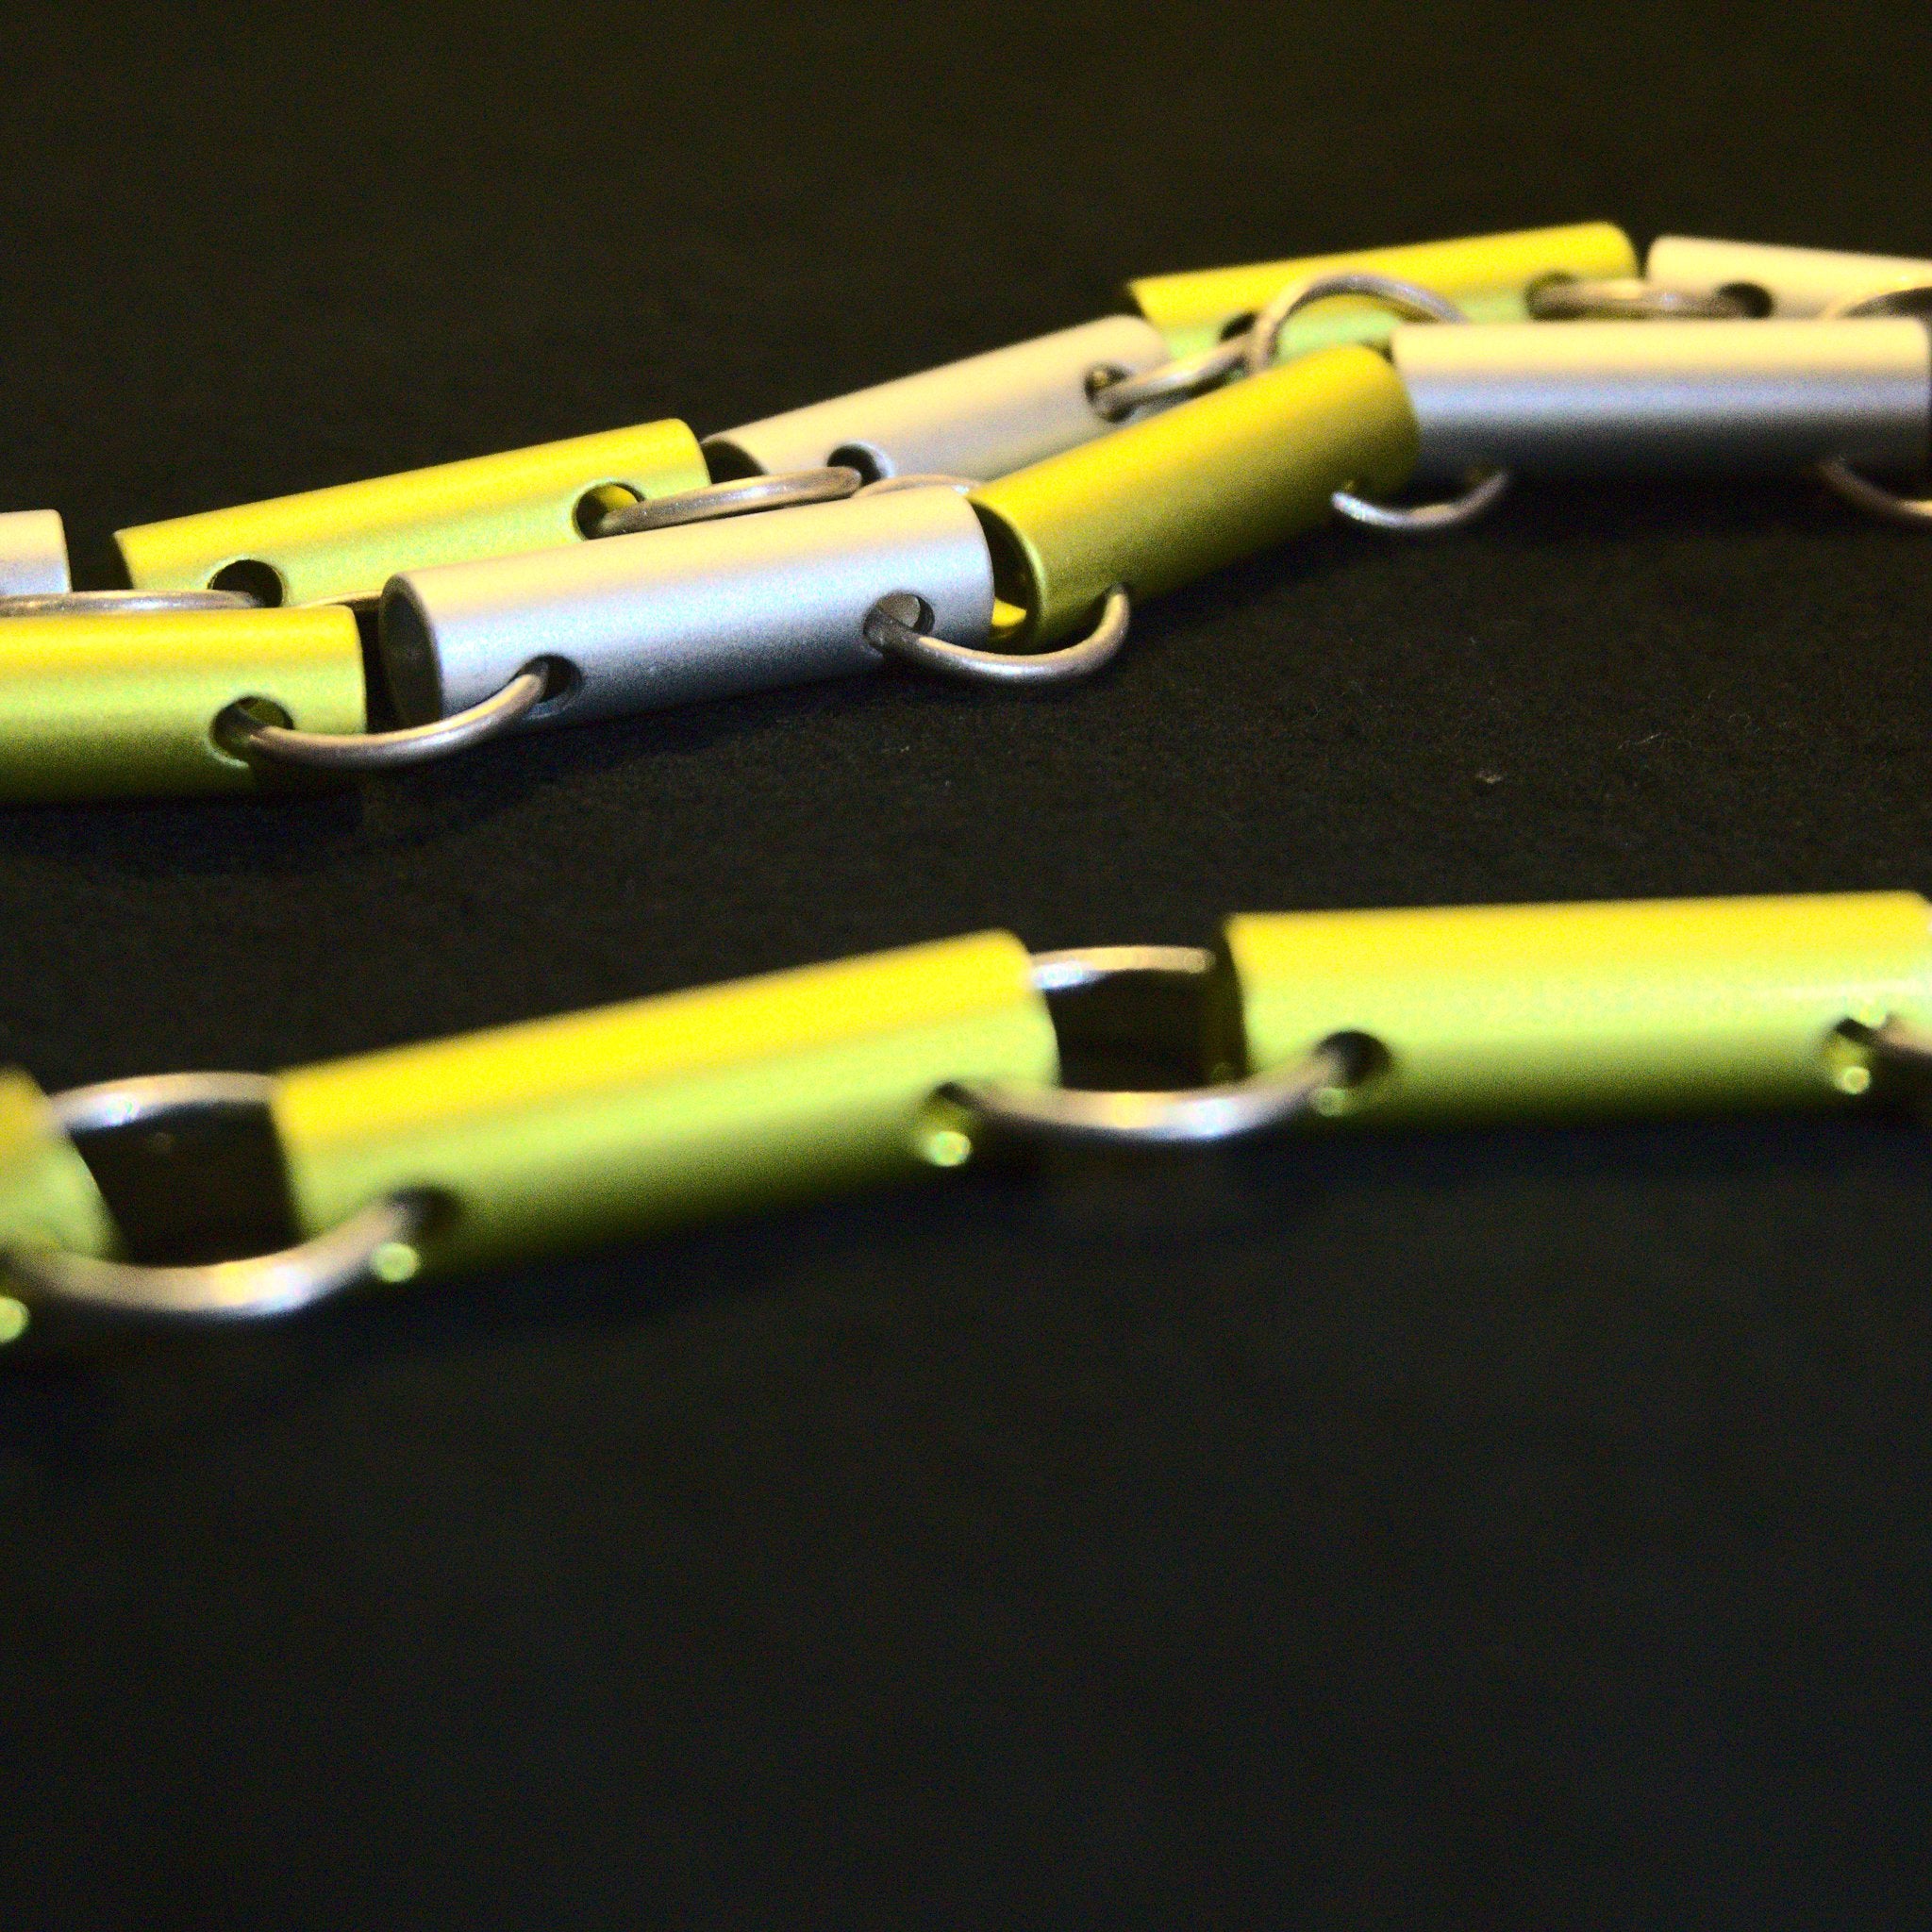 Retro Lime Necklace Sold at 50% off at checkout!